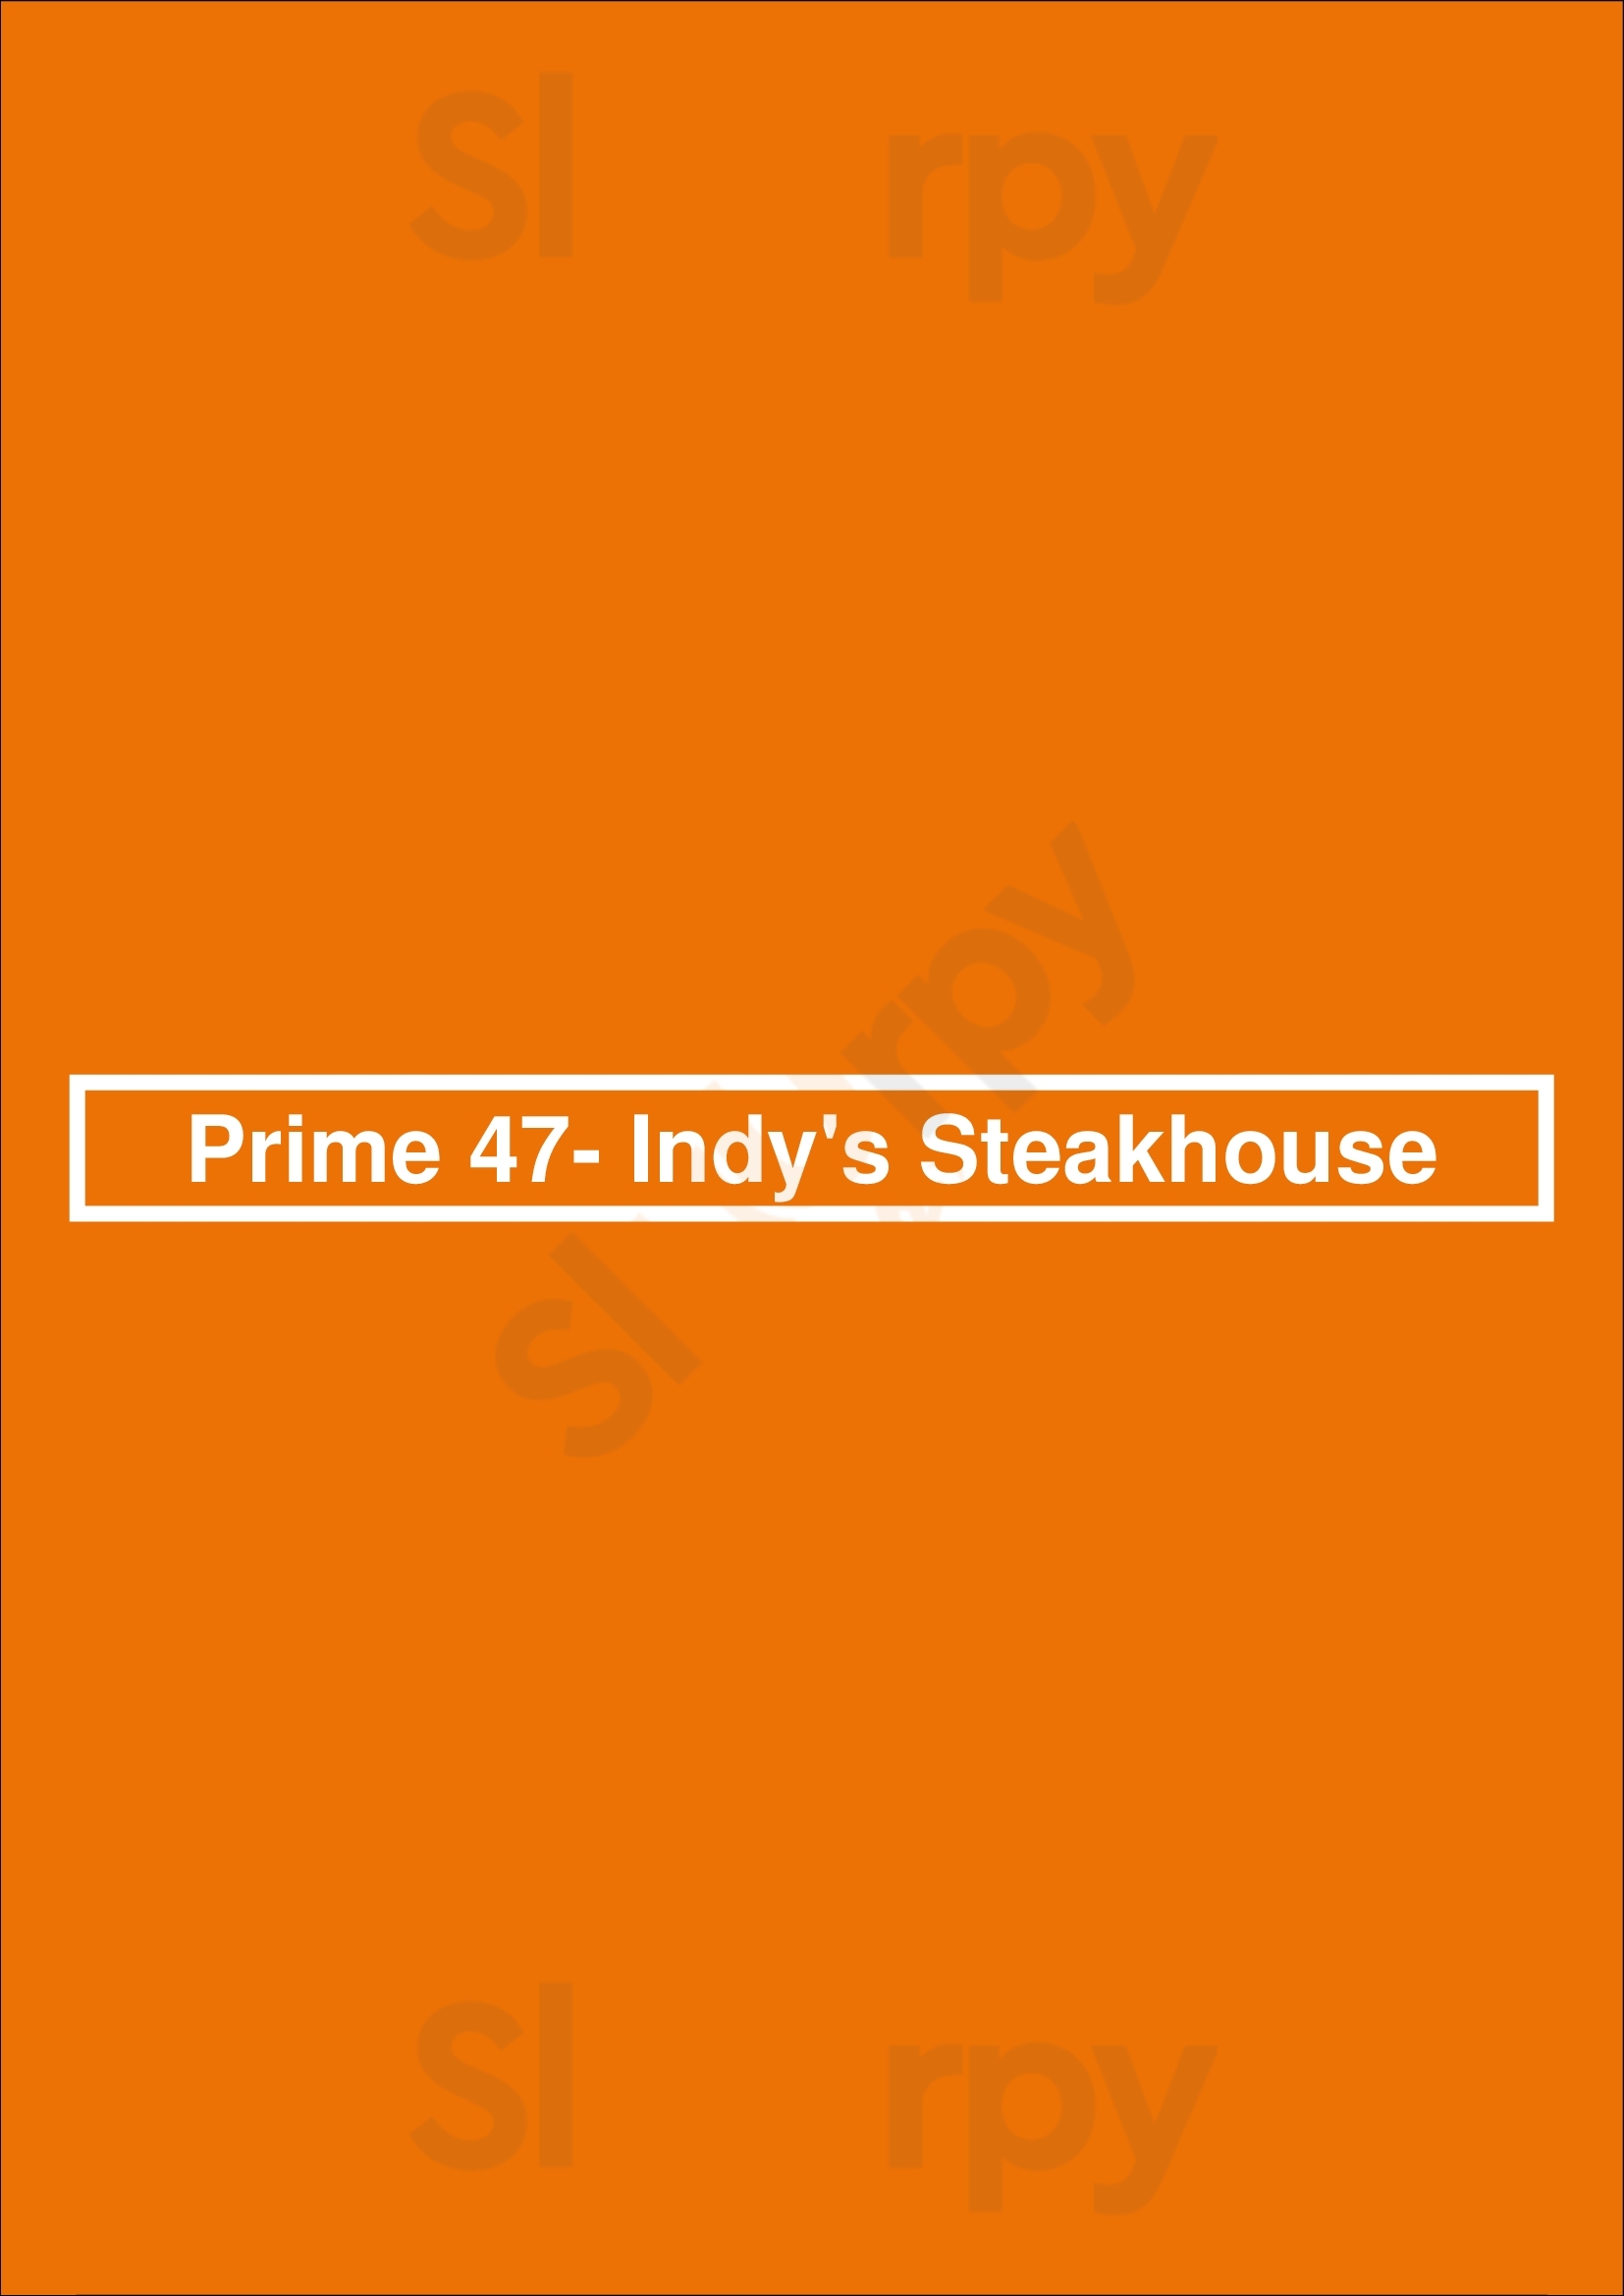 Prime 47- Indy's Steakhouse Indianapolis Menu - 1